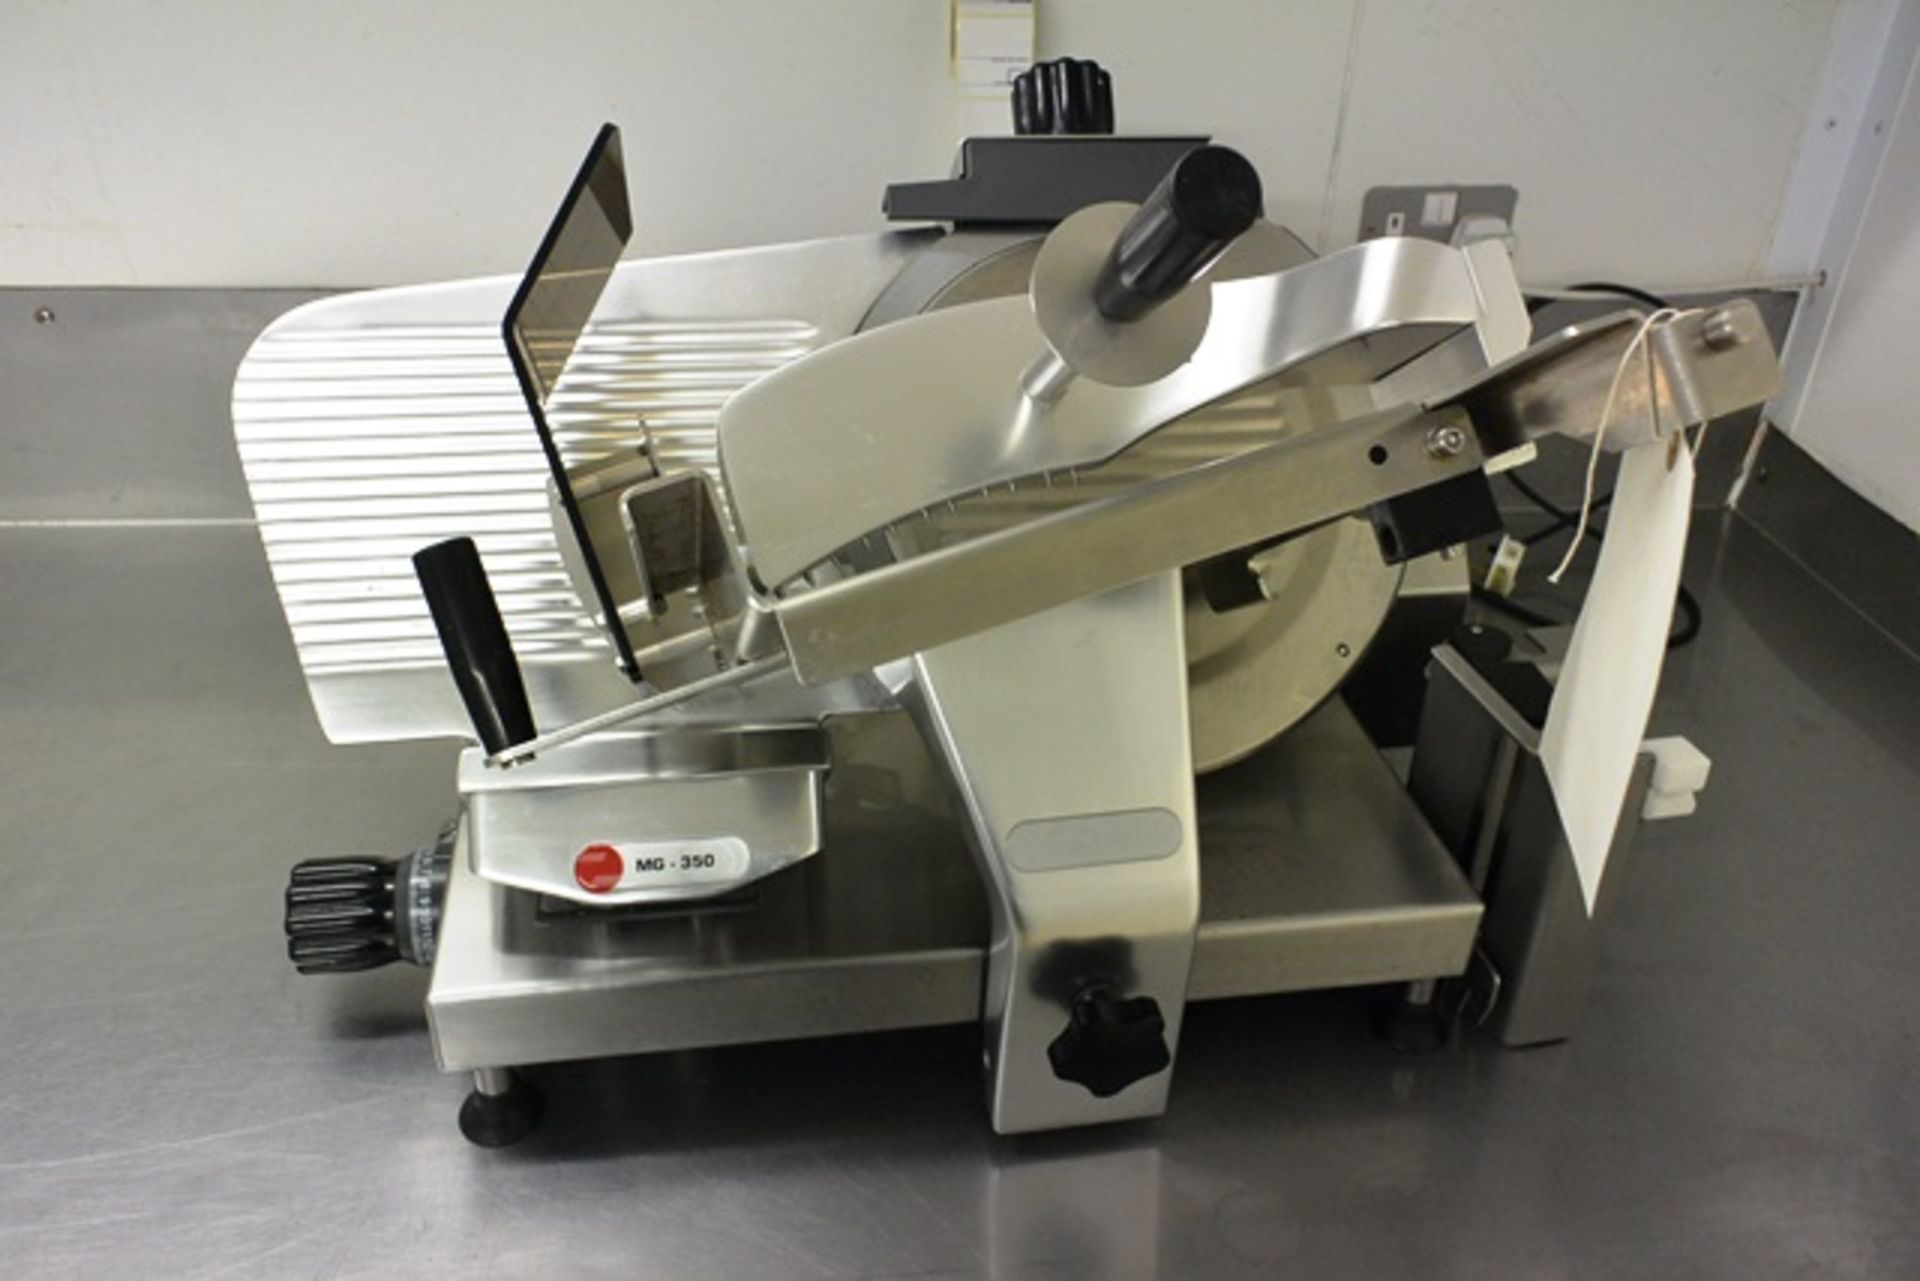 MG 350 stainless steel bench top meat slicer, 240v - Image 2 of 2